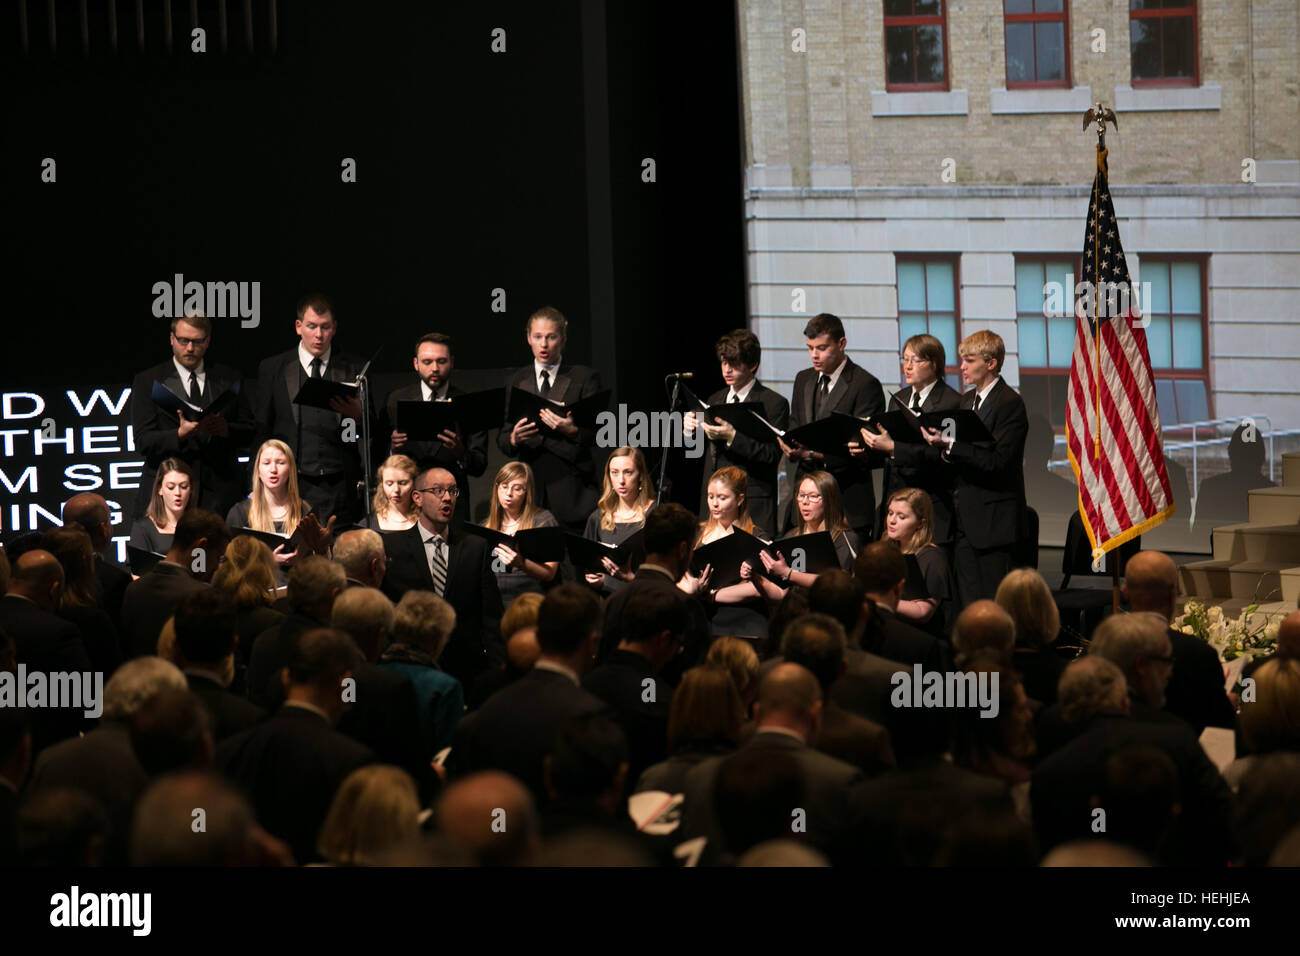 The Muskingum University Chamber Singers and pianist Dixie Lee Hayes Heck perform during a memorial celebration of the life of former NASA astronaut and U.S. Senator John Glenn at the Ohio State University Mershon Auditorium December 17, 2016 in Columbus, Ohio. Stock Photo